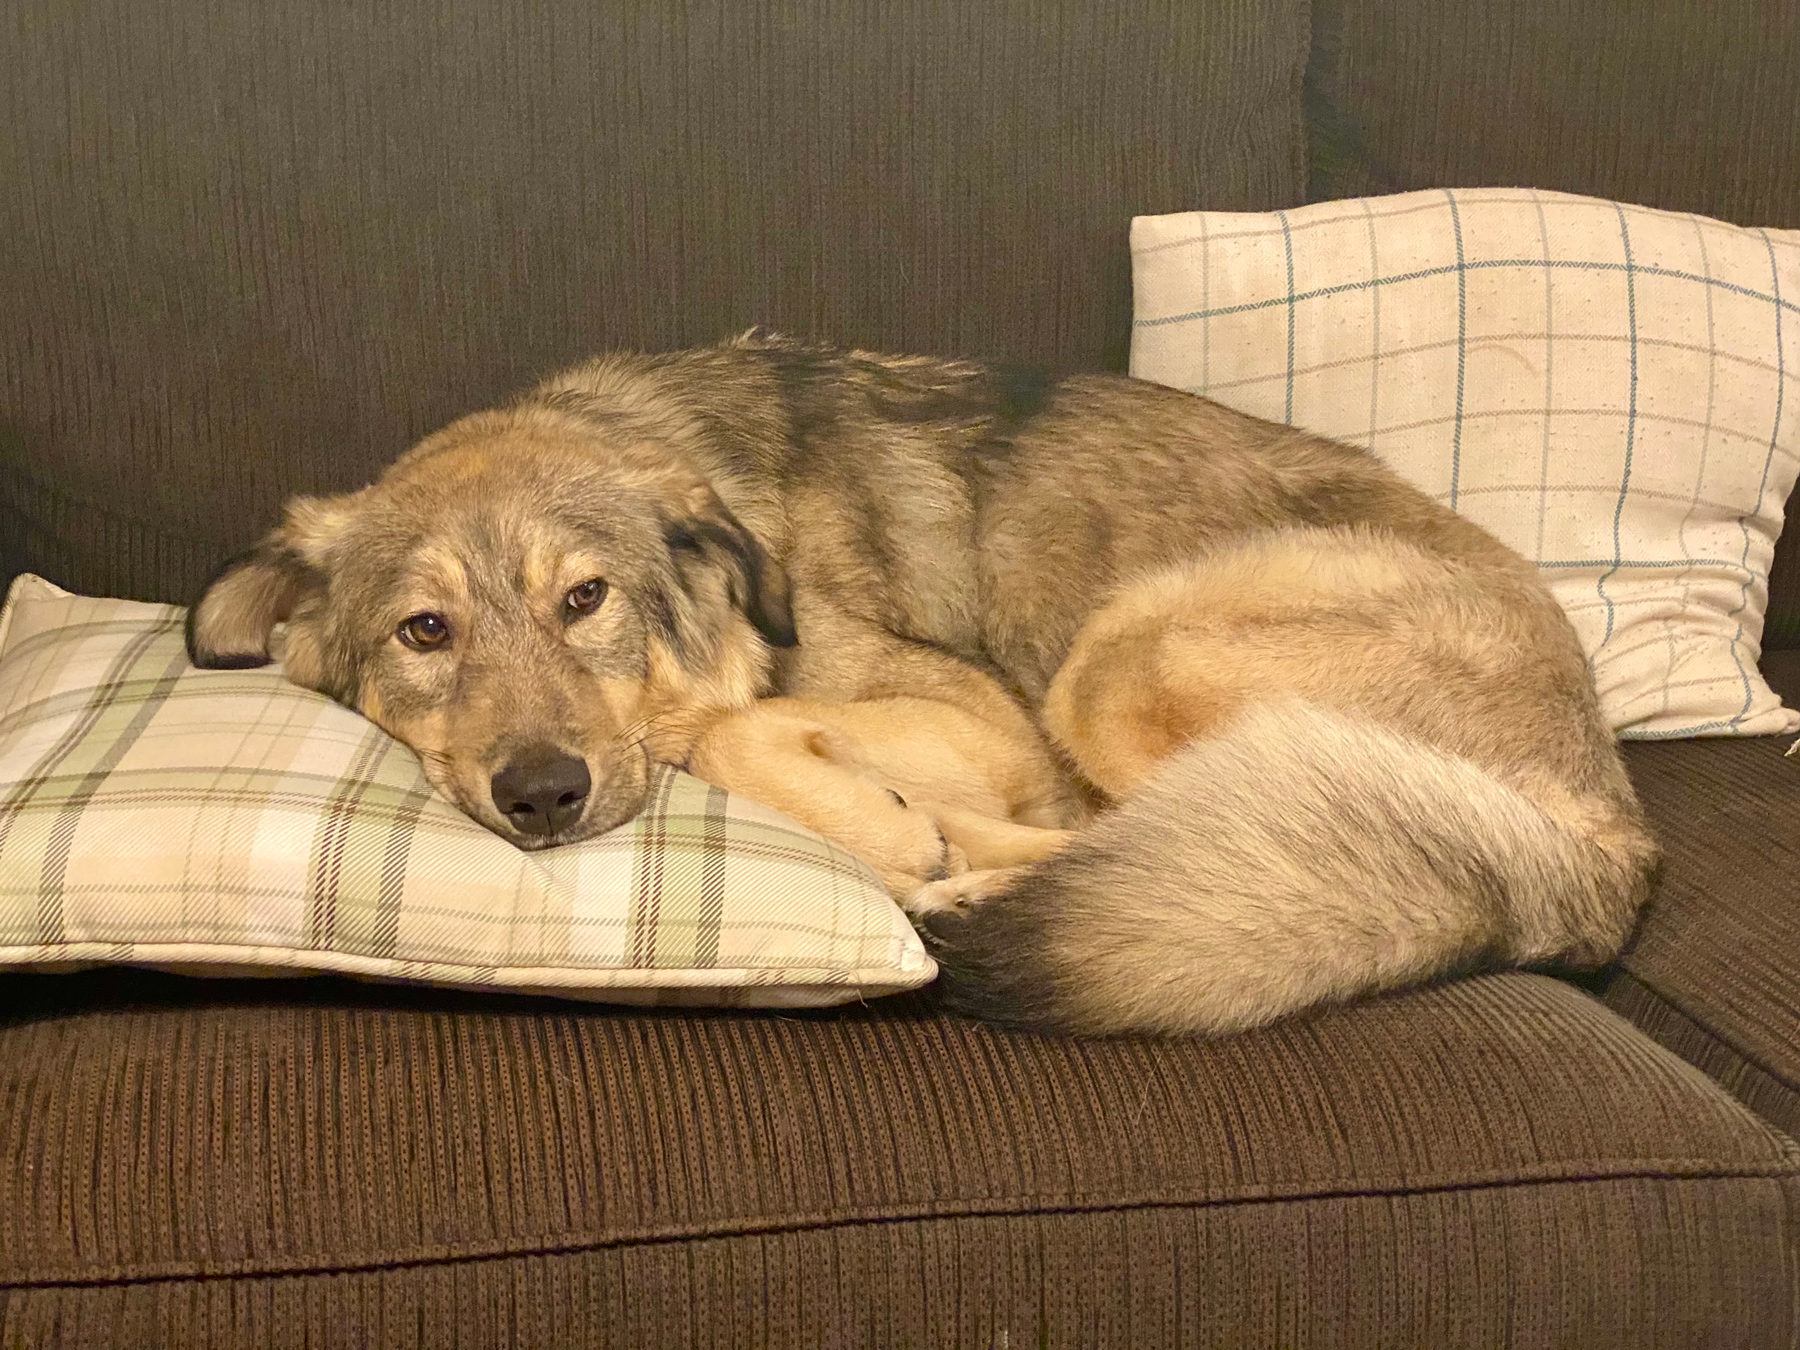 A cute dog resting his head on a pillow